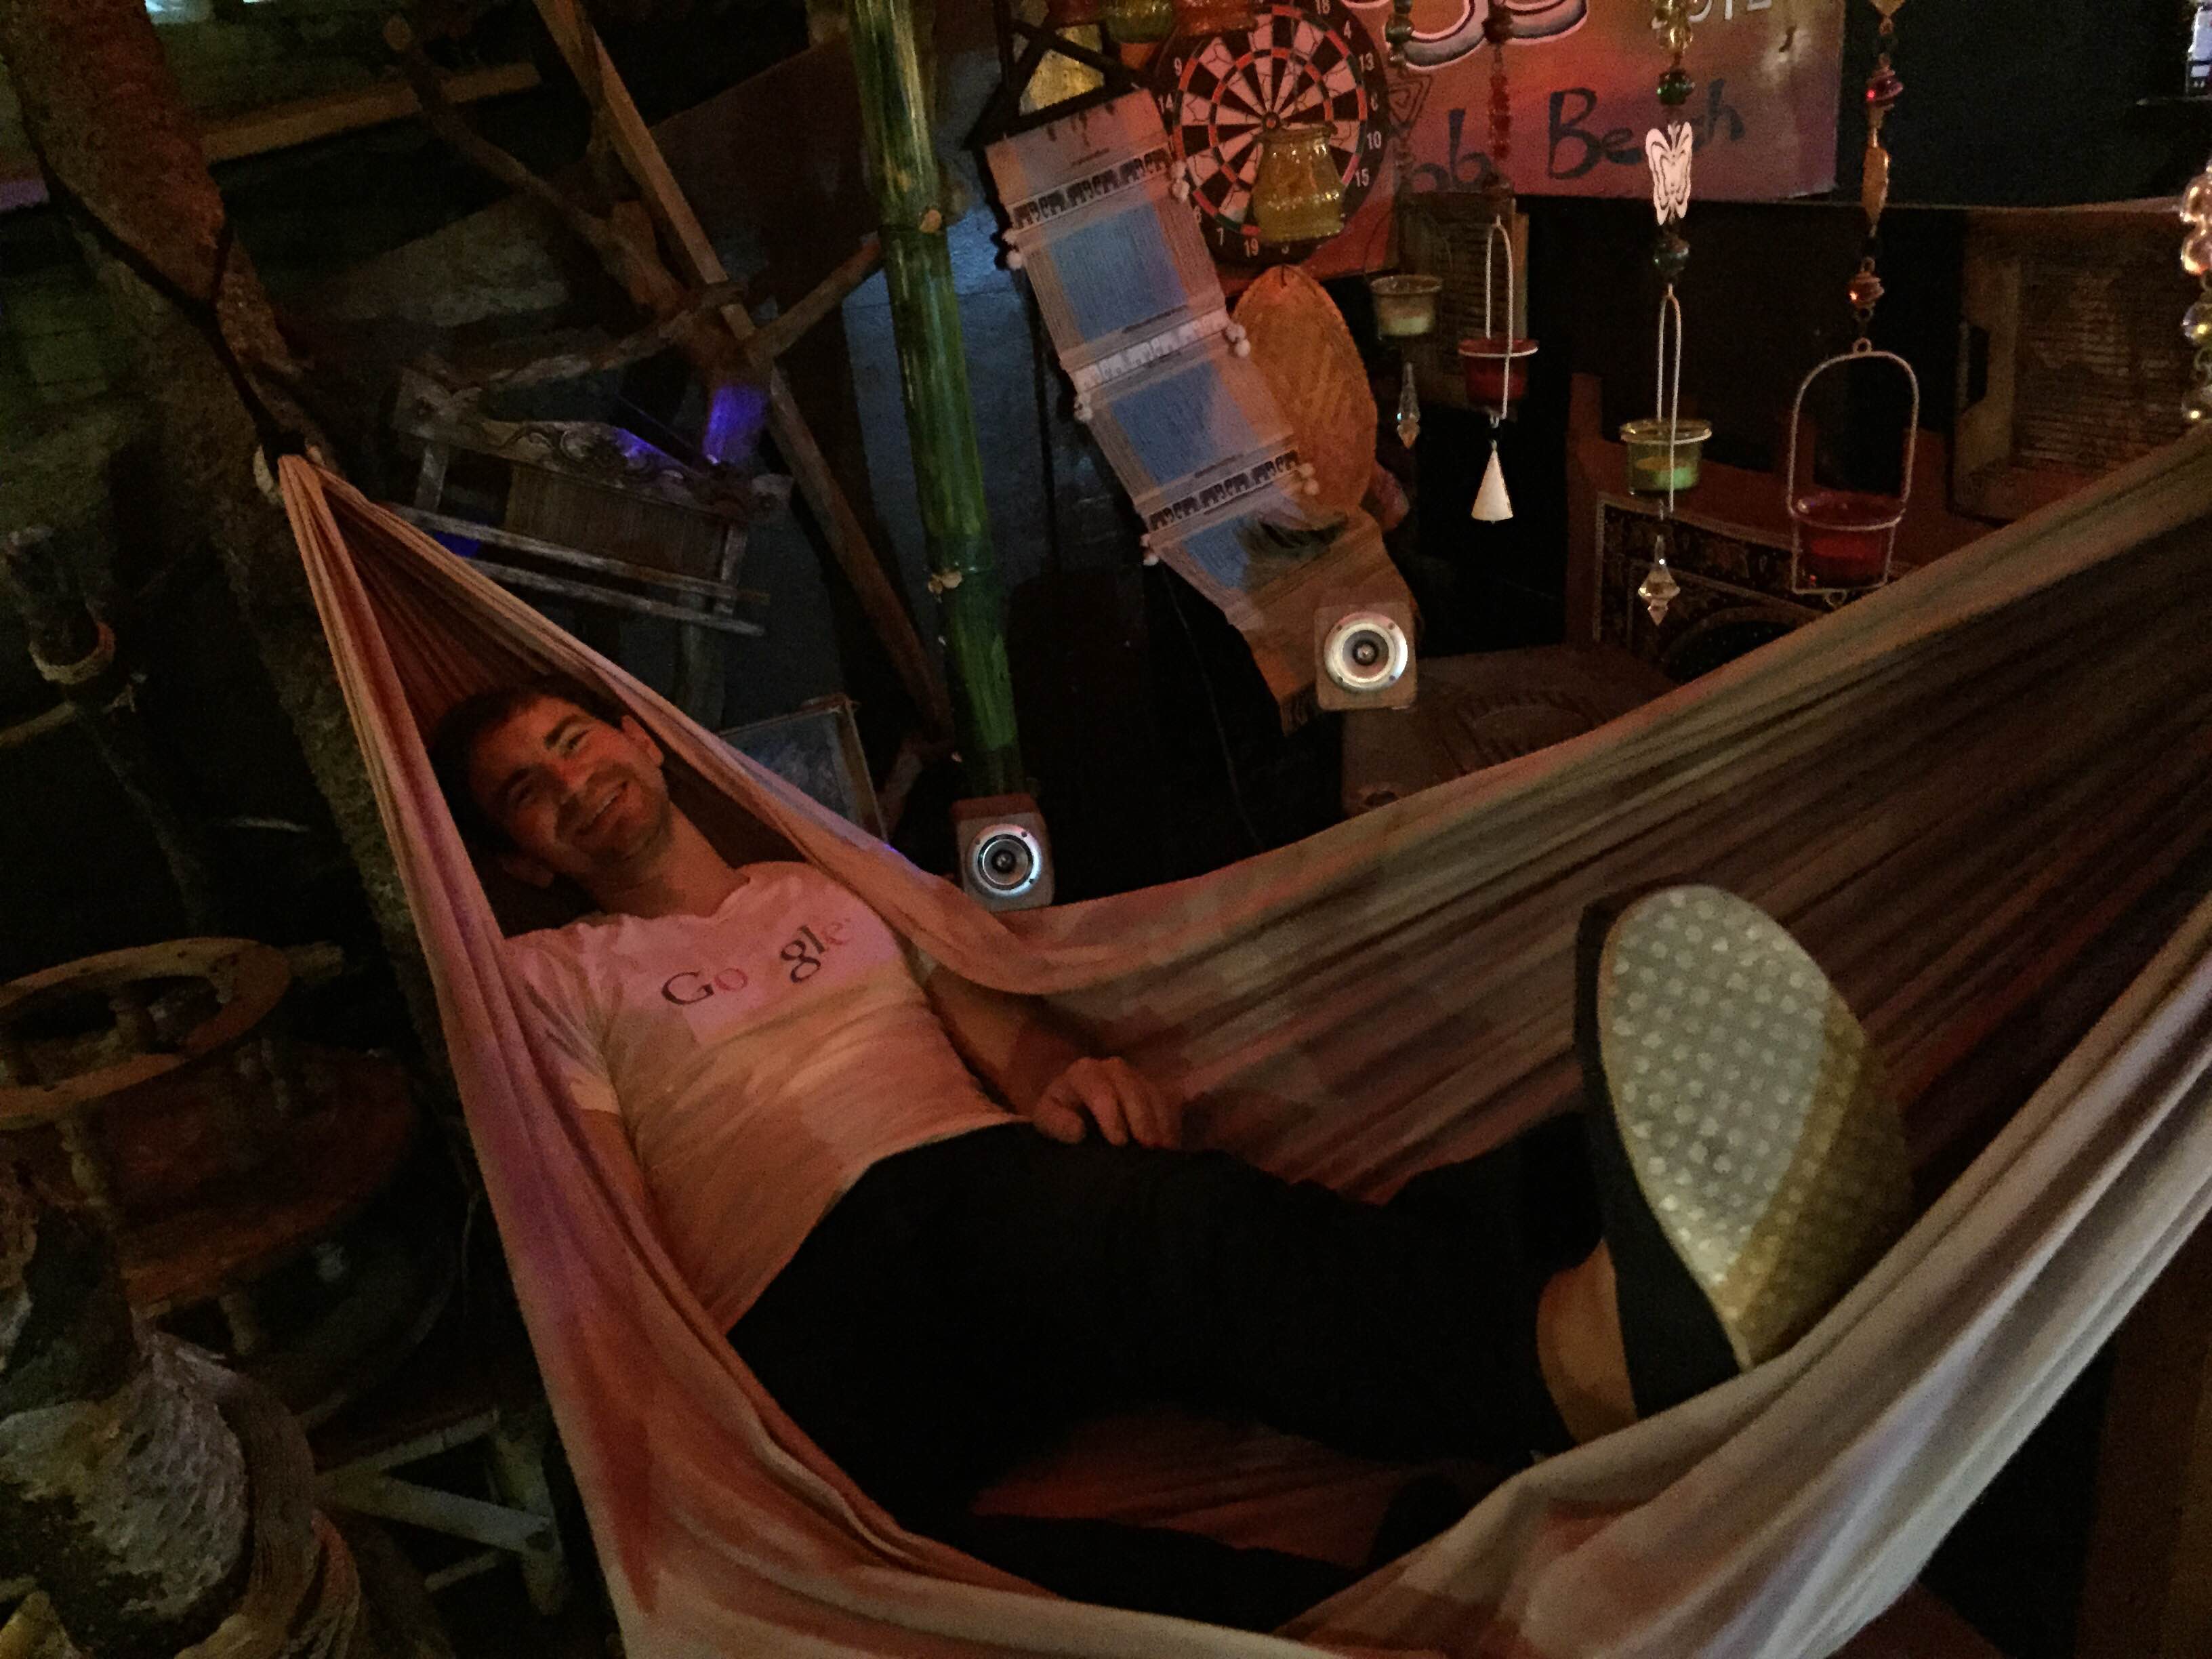 Daniel loving life in a hammock at dinner—he's been excited to get to Ko Lanta!